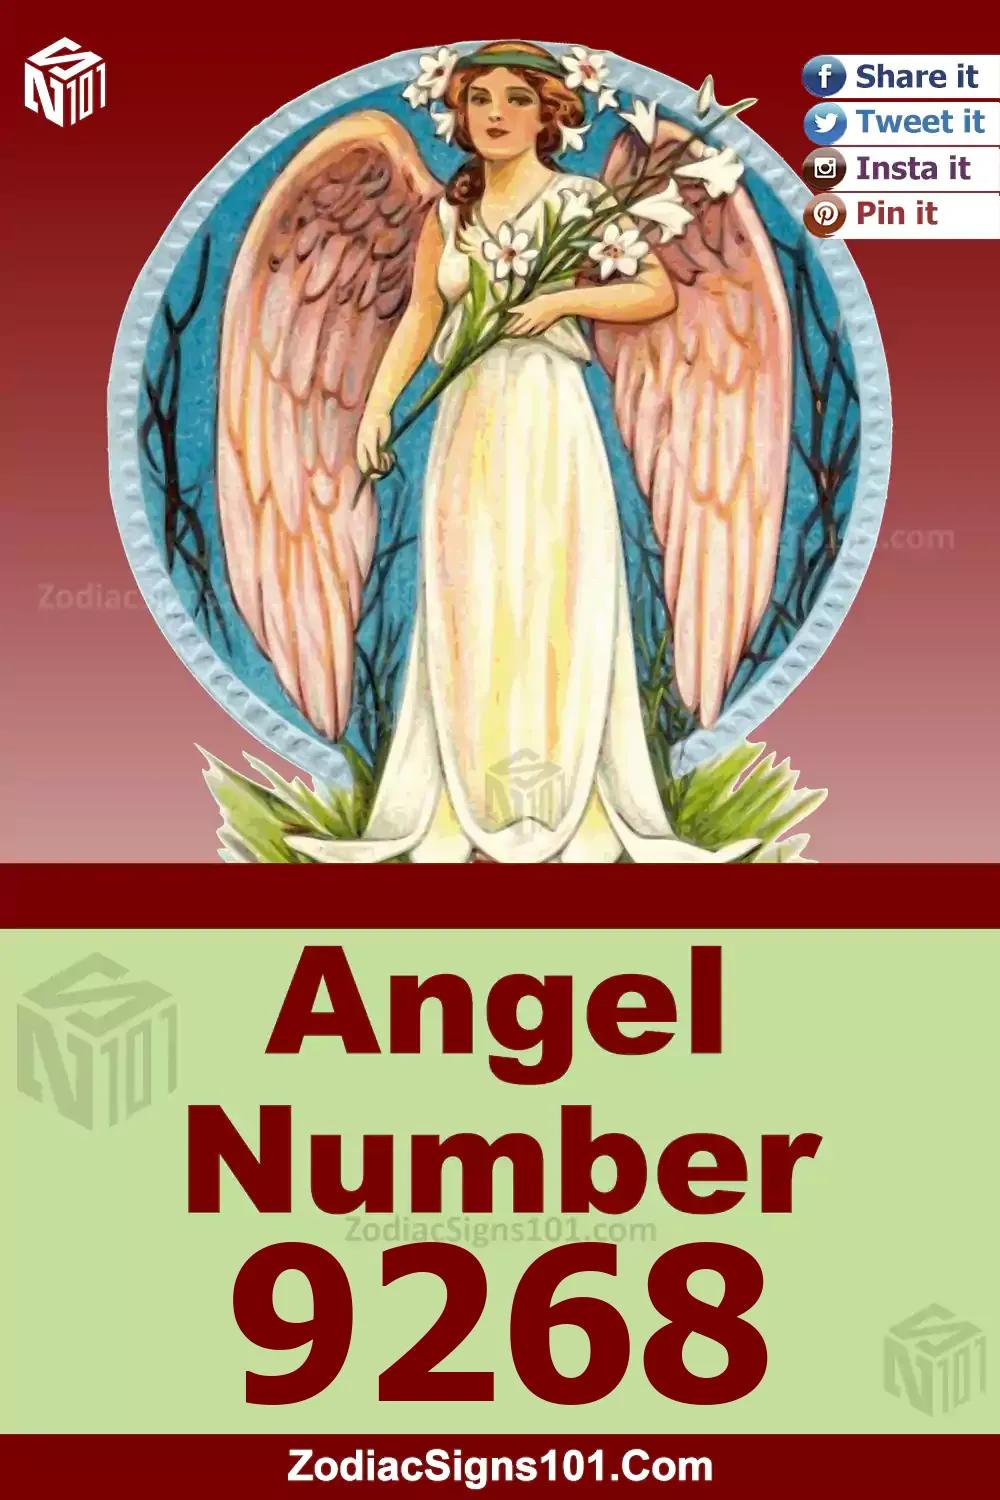 9268 Angel Number Meaning